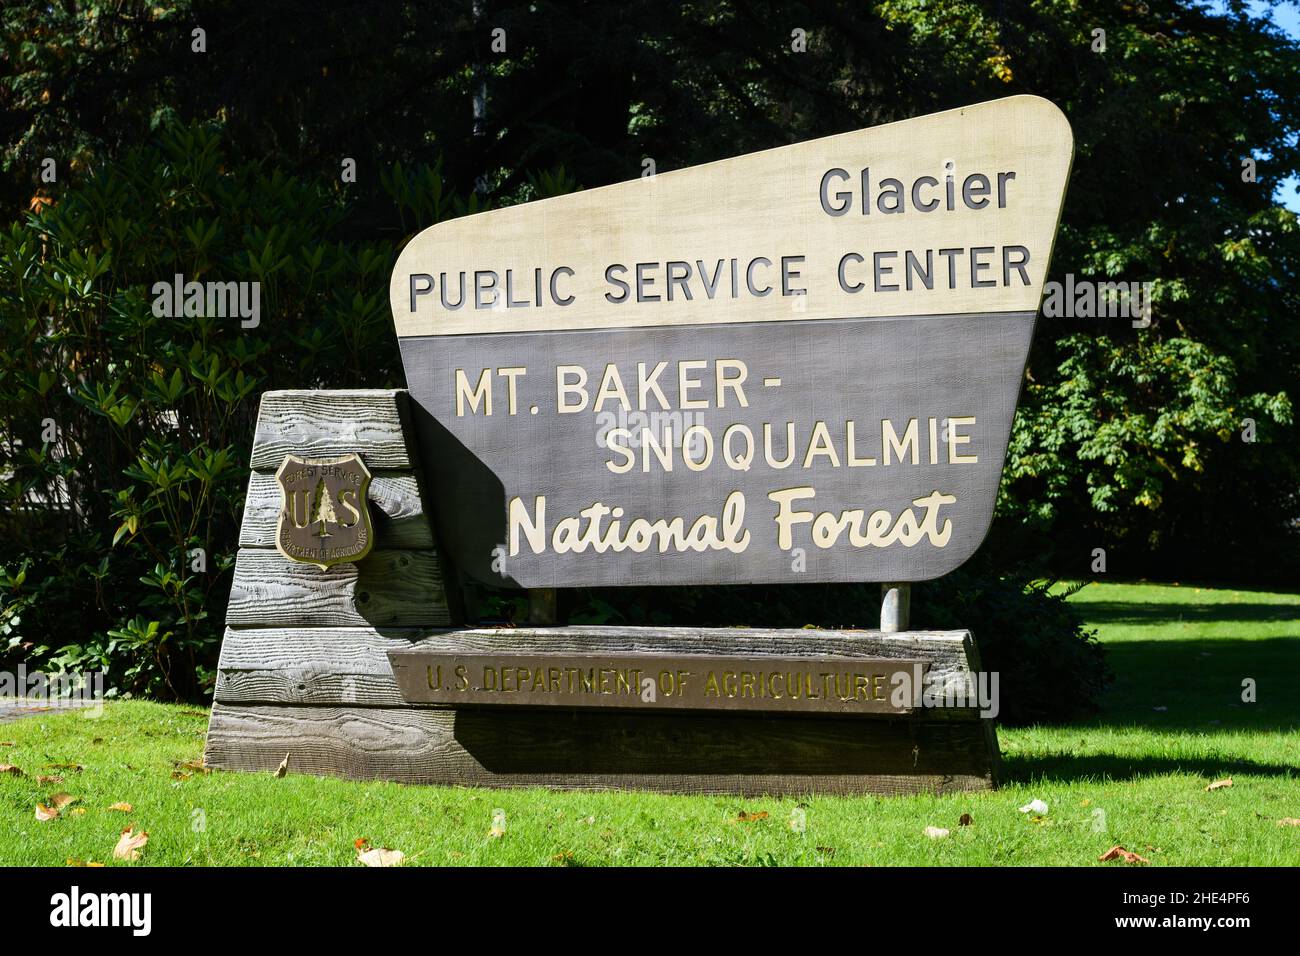 Glacier, WA, USA - September 23, 2021; Sign for the Public Service Center at Glacier in Mt Baker Snoqualmie National Forest in the Pacific Northwest Stock Photo